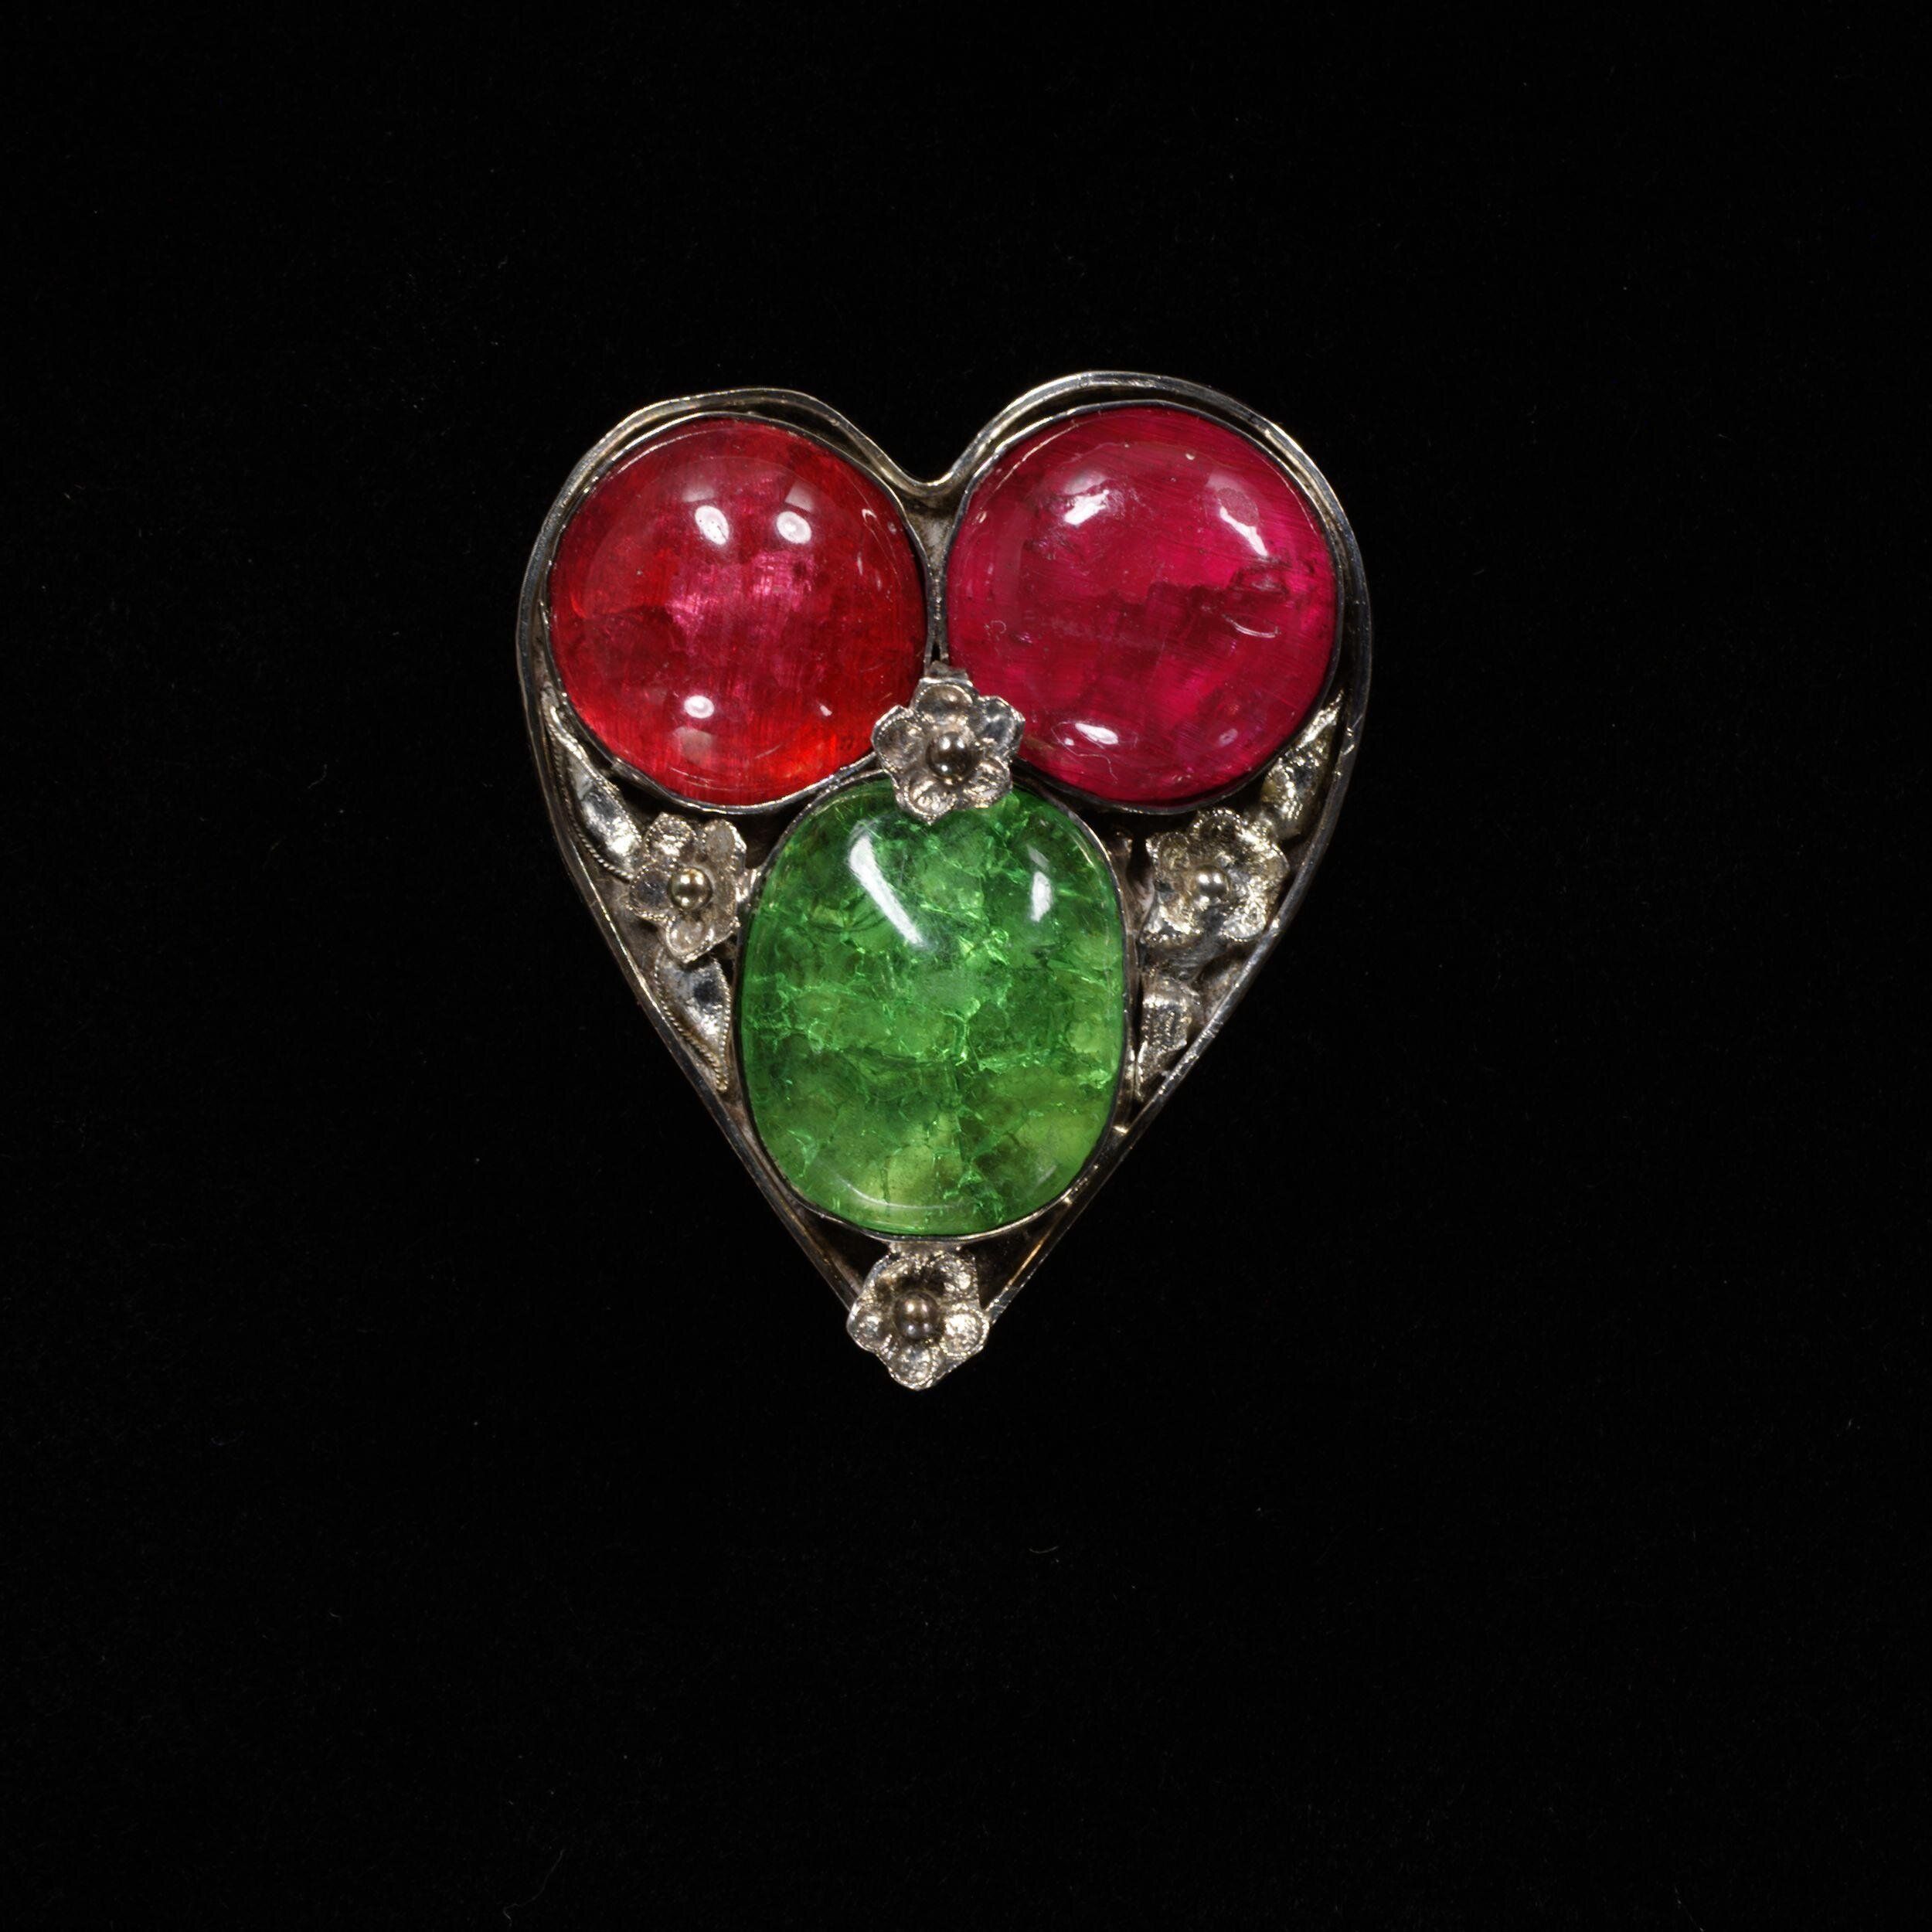 This paste-set heart brooch was given to Jane Morris (wife of William Morris) by Dante Gabriel Rossetti. She was often painted by Rossetti, who was known to visit curiosity shops in London to hunt for exotic jewelry and accessories for his paintings. The Victoria & Albert Museum.